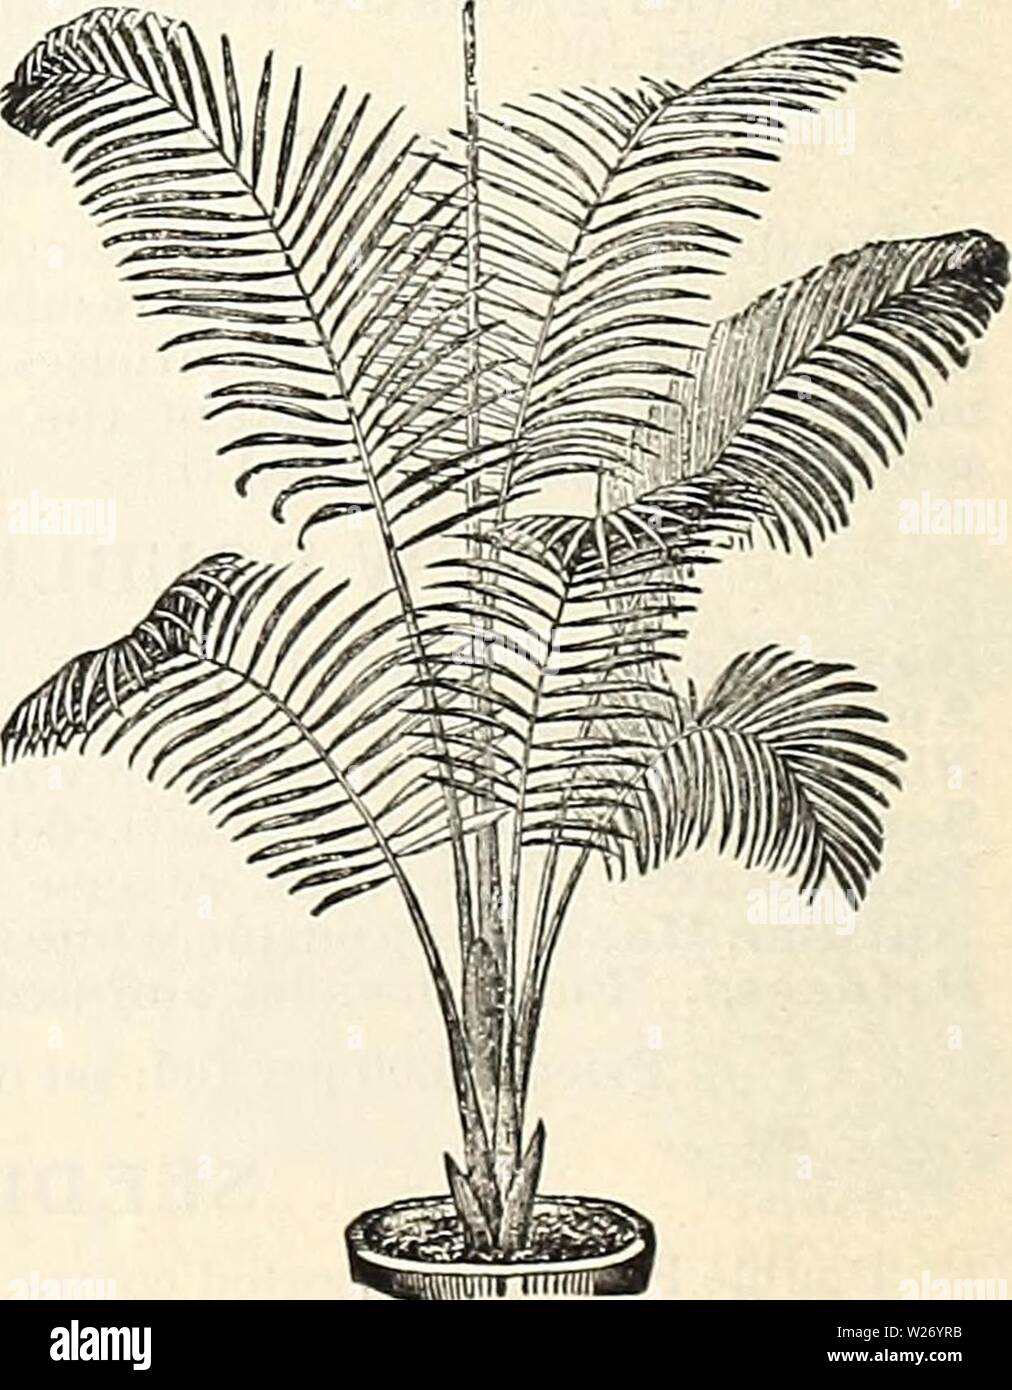 Archive image from page 27 of Dealers and florists wholesale list. Dealers and florists wholesale list of plants  dealersfloristsw18pete 0 Year: 1897  KENTIA BELMOEEAIJA. ADIAJSTUM CUNEATTJM:. ADIANXUM CUNEATUM. One of the most useful of all the Ferns. We offer a fine stock at the following very low prices. Strong plants from 2 inch pots $4.00 per 100 3 ' 6.00 ' ' 4 ' 16.00 ' FERNS IN VARIETY. 2 incli. 3 inch. 4 inch. Adiantum Bellum $4.00 $6.00 Ballii 4 00 6.00 Pubescens 4.00 6.00 $12.00 Blechnum Orientale 4.00 6.00 12.00 Occidentale 4.00 6.00 12.00 Davallia Stricta 4.00 6.00 Gymnogramma Chry Stock Photo